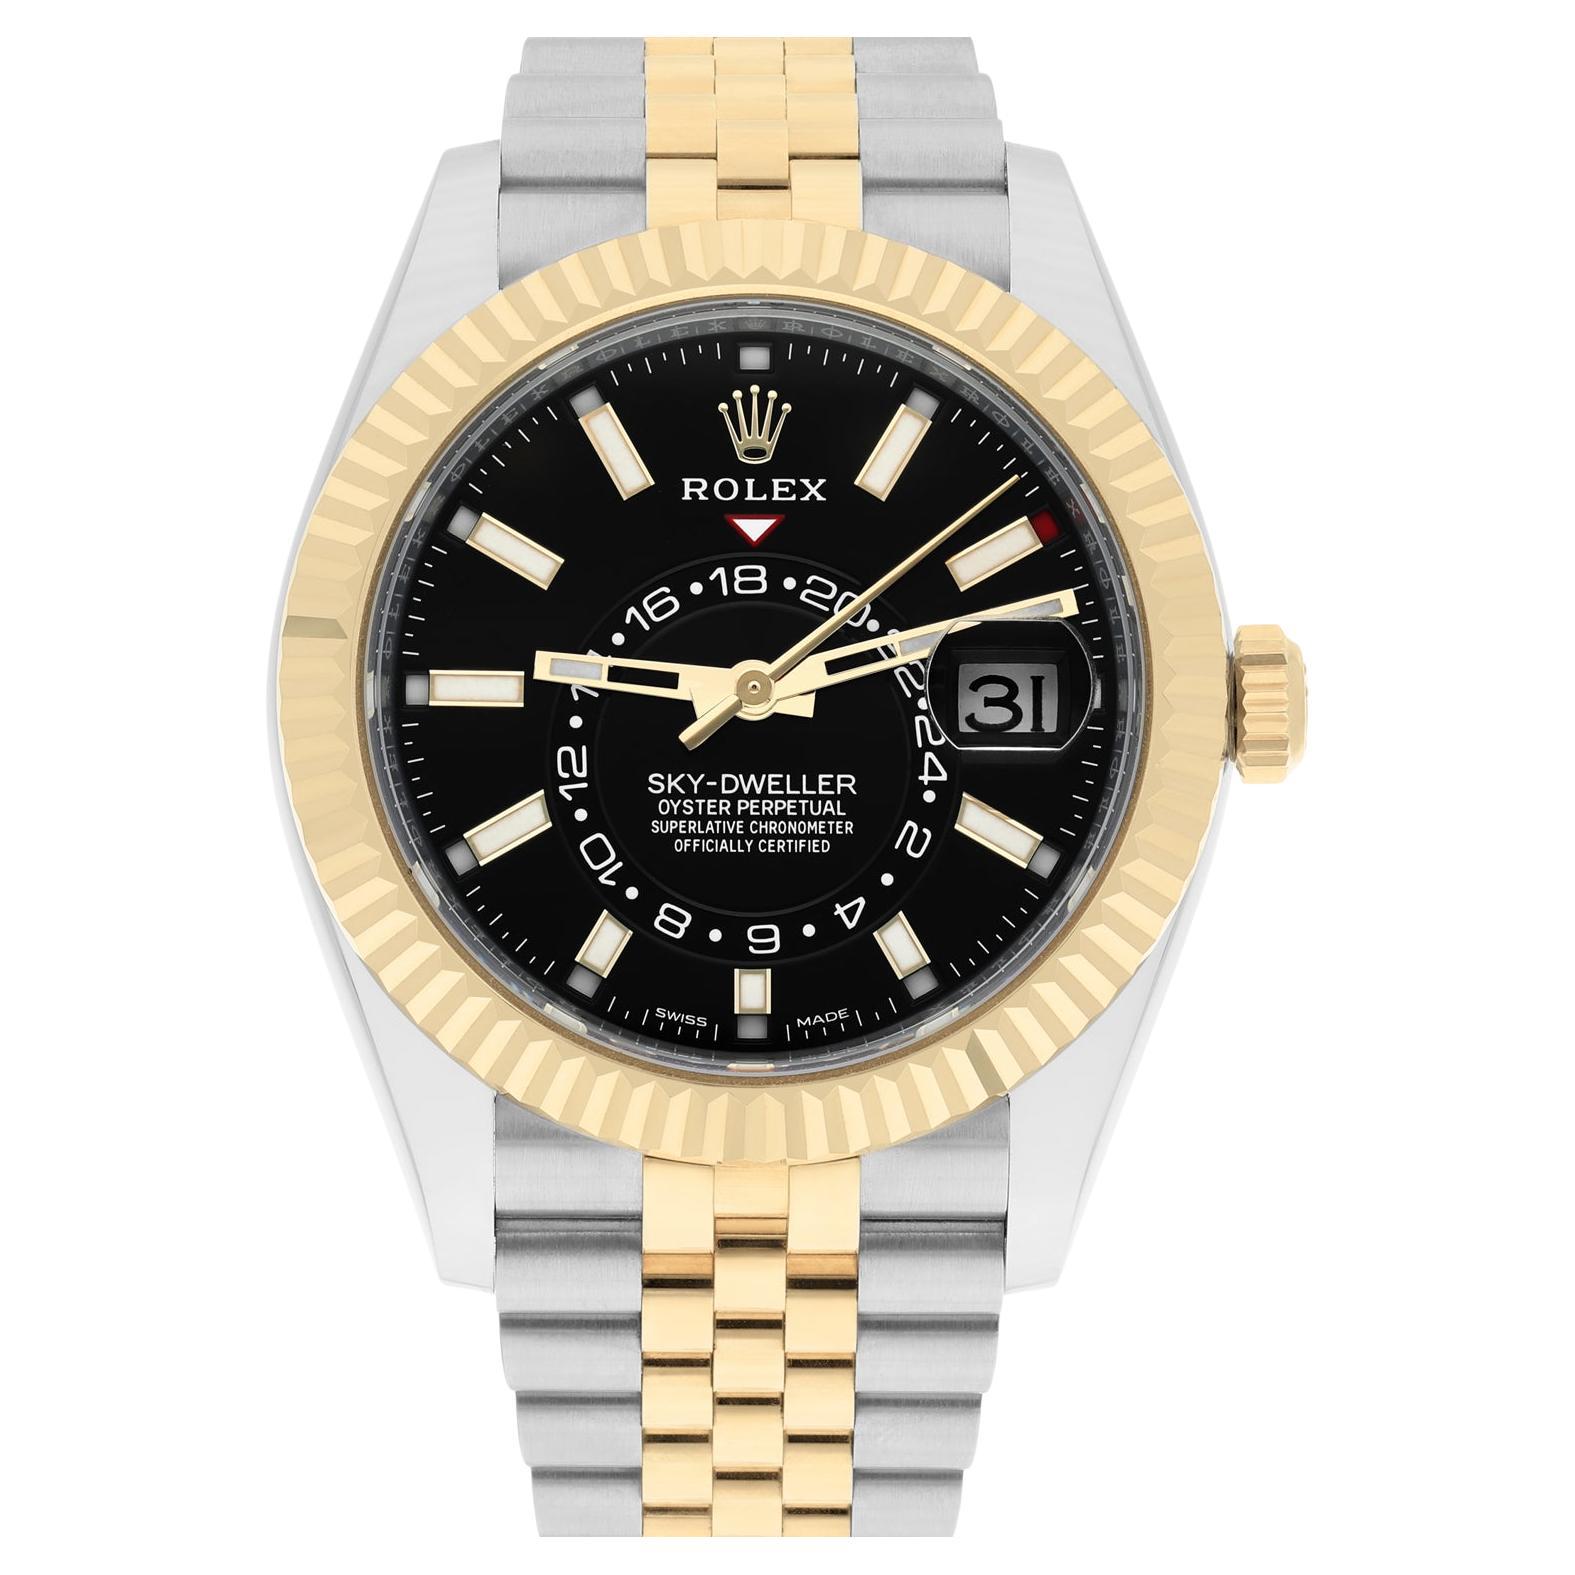 Is Tudor made by Rolex?